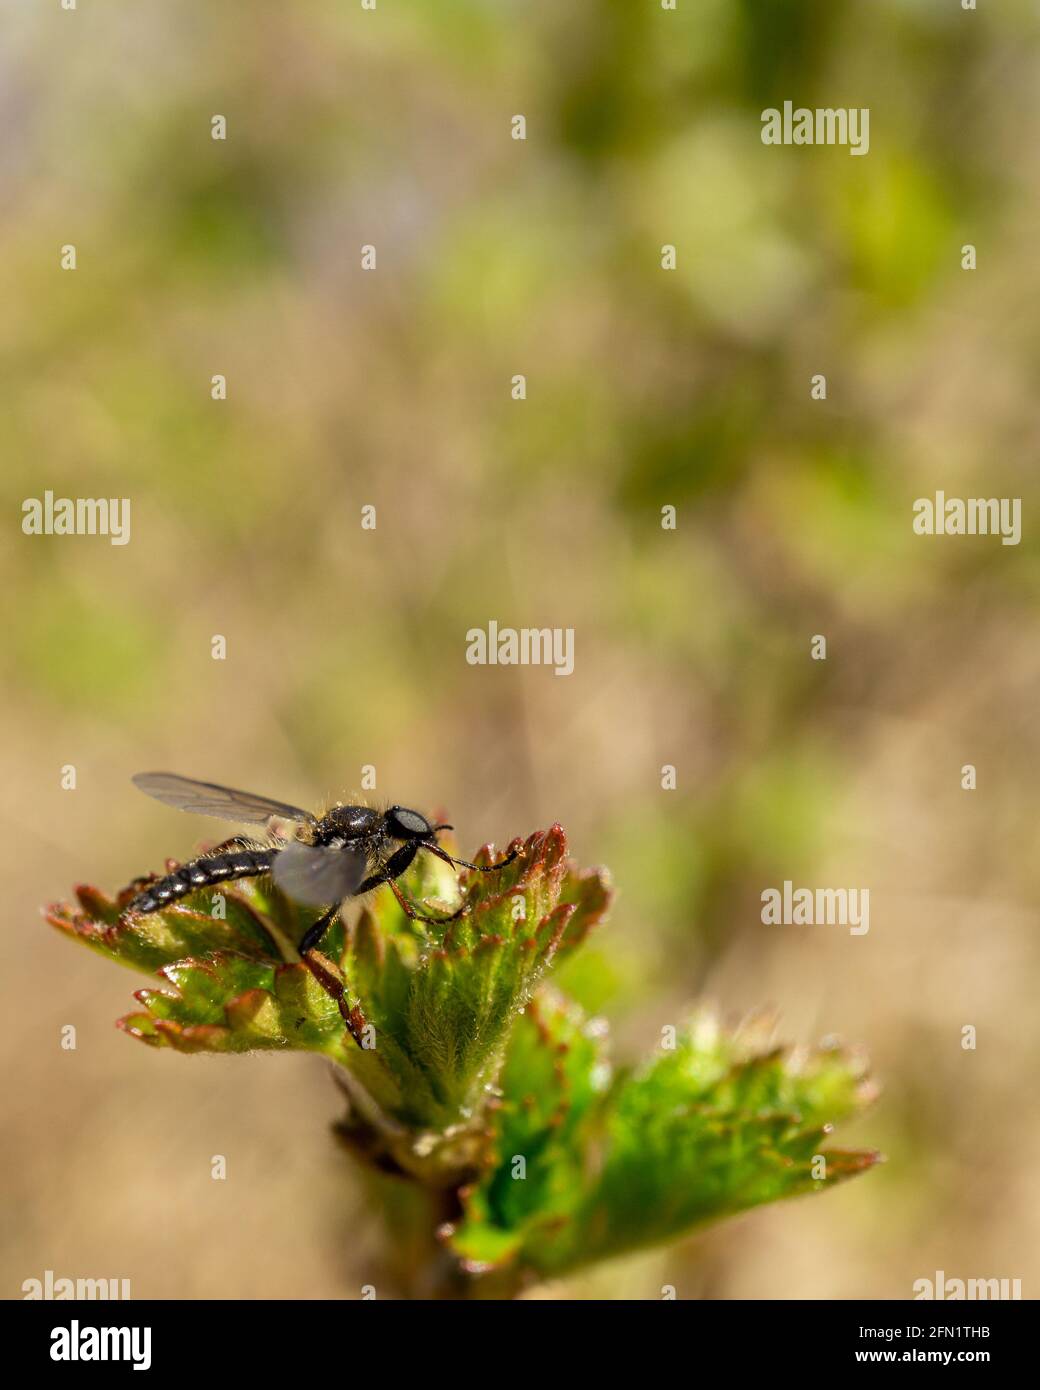 Vertical shot of a bibionidae on a green plant Stock Photo